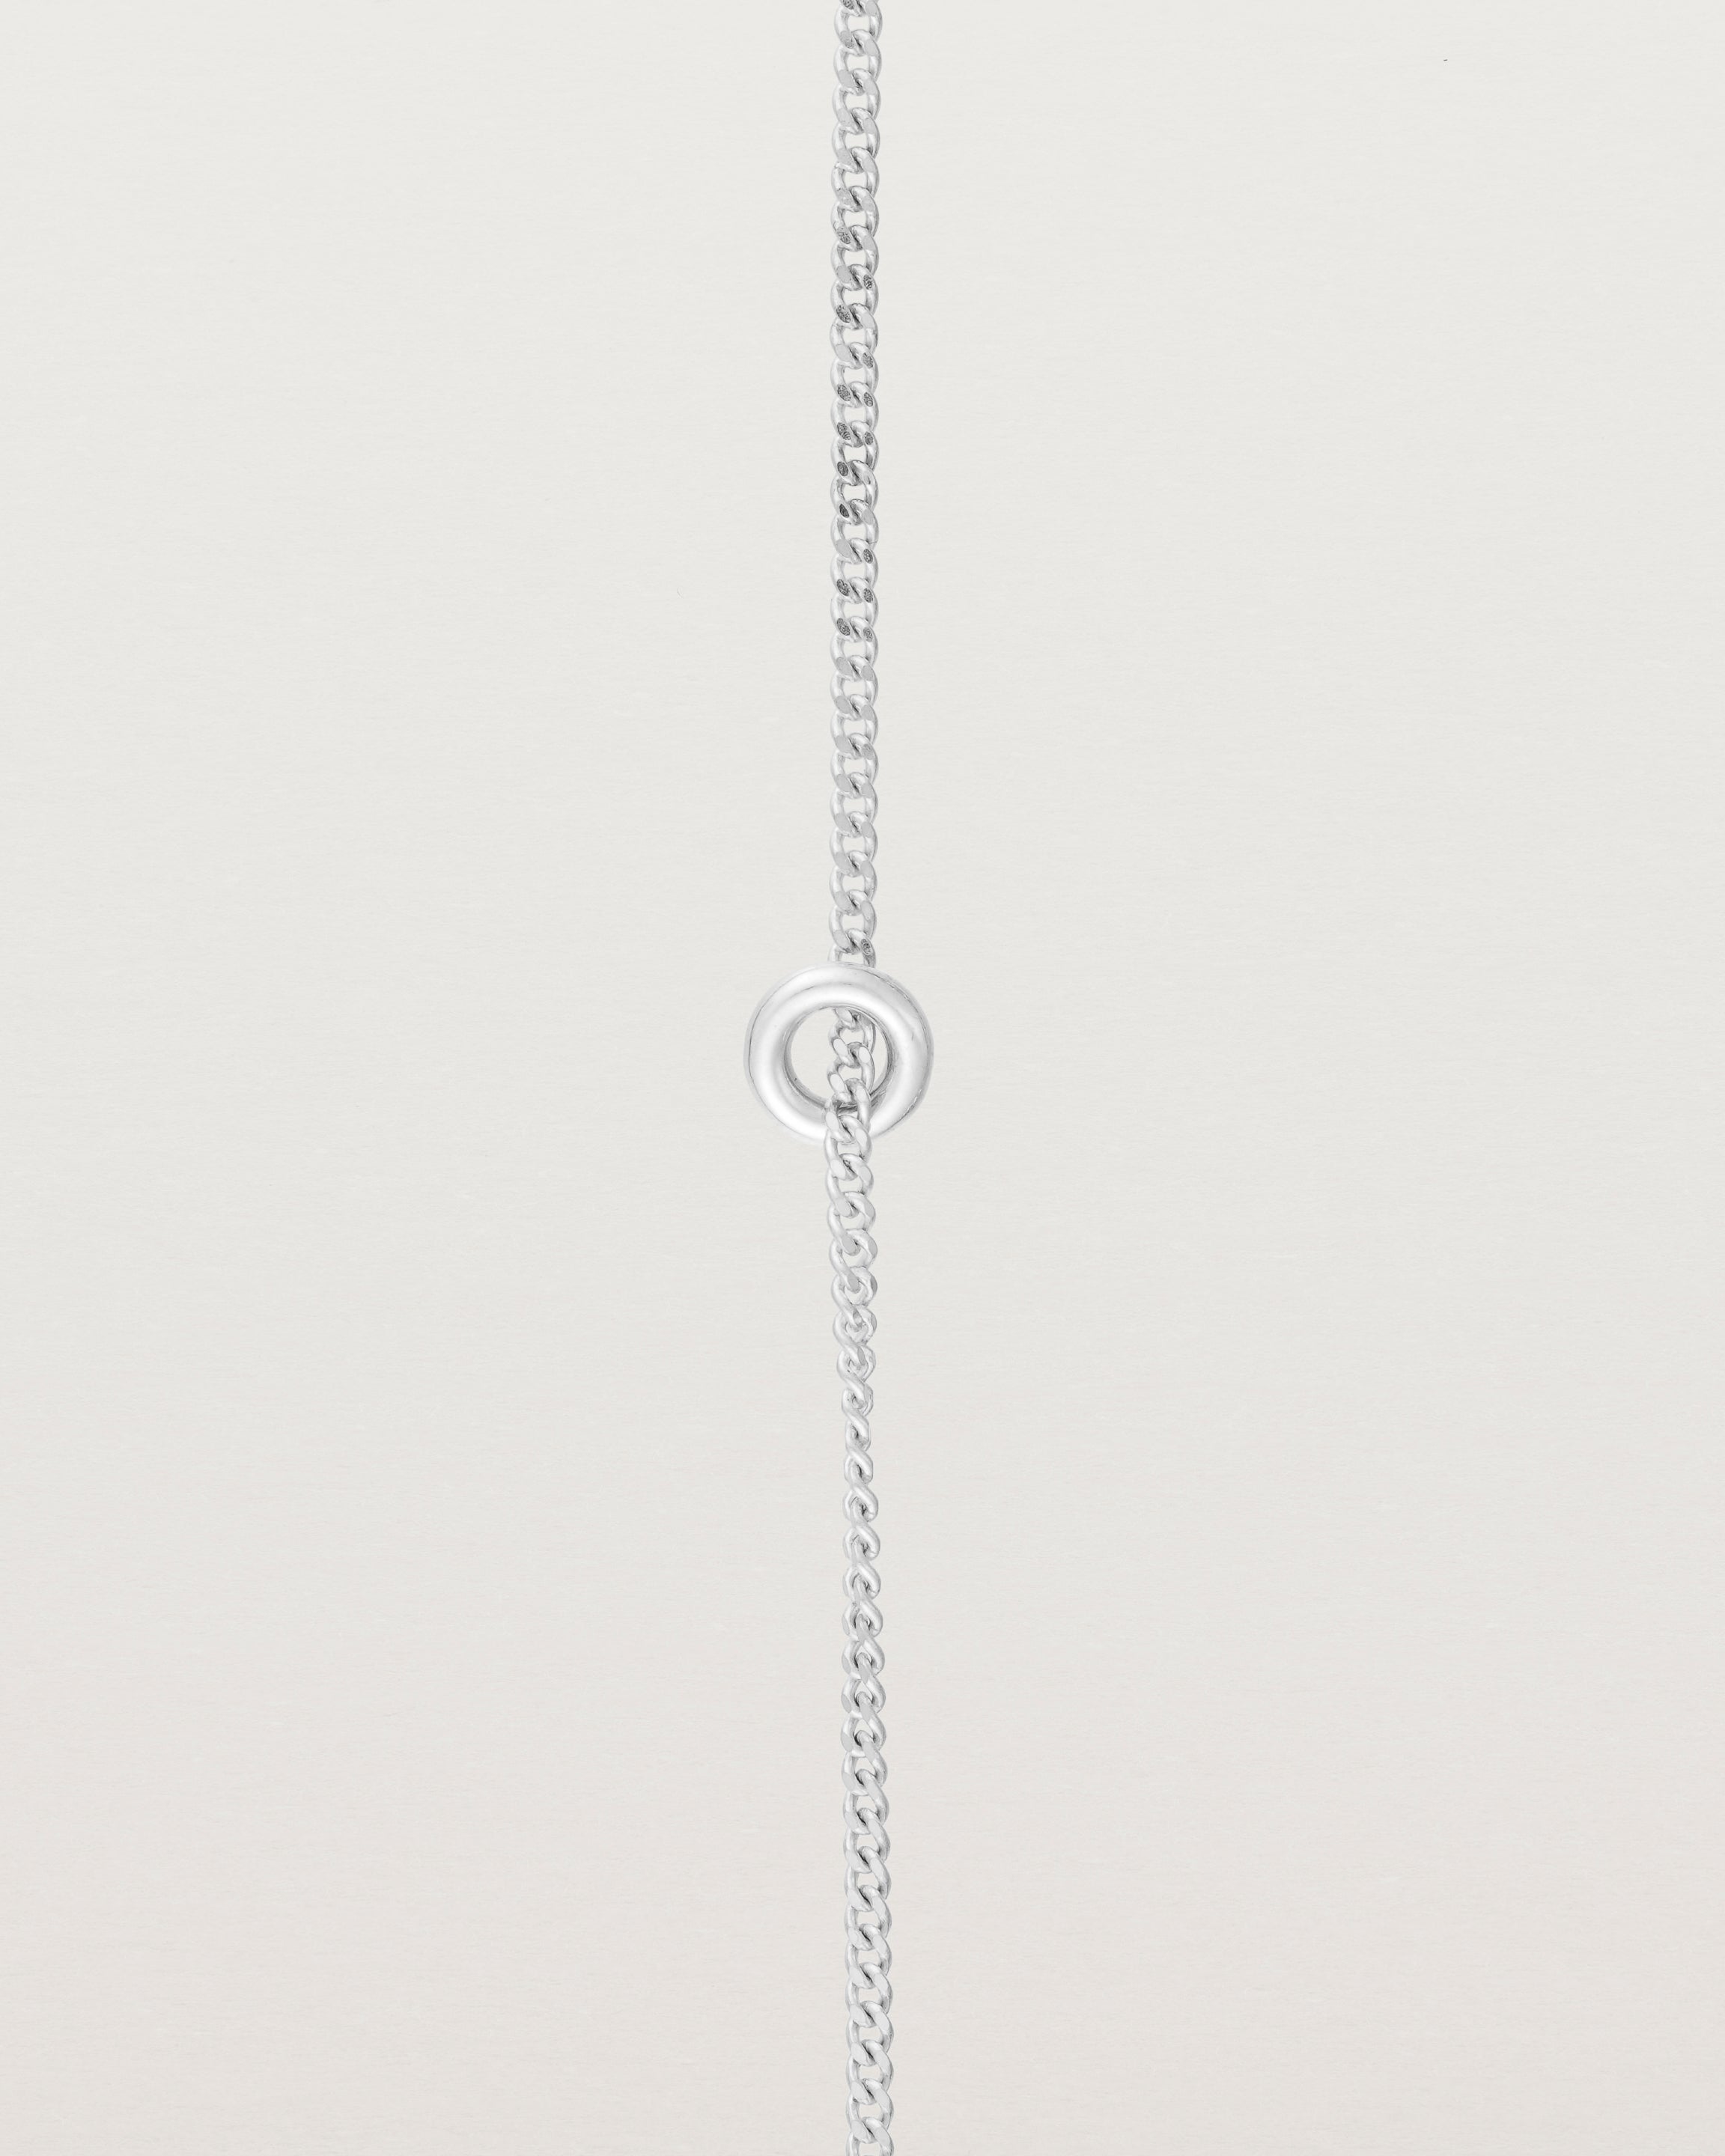 close up view of the Aether Bracelet showing one round charm in sterling silver